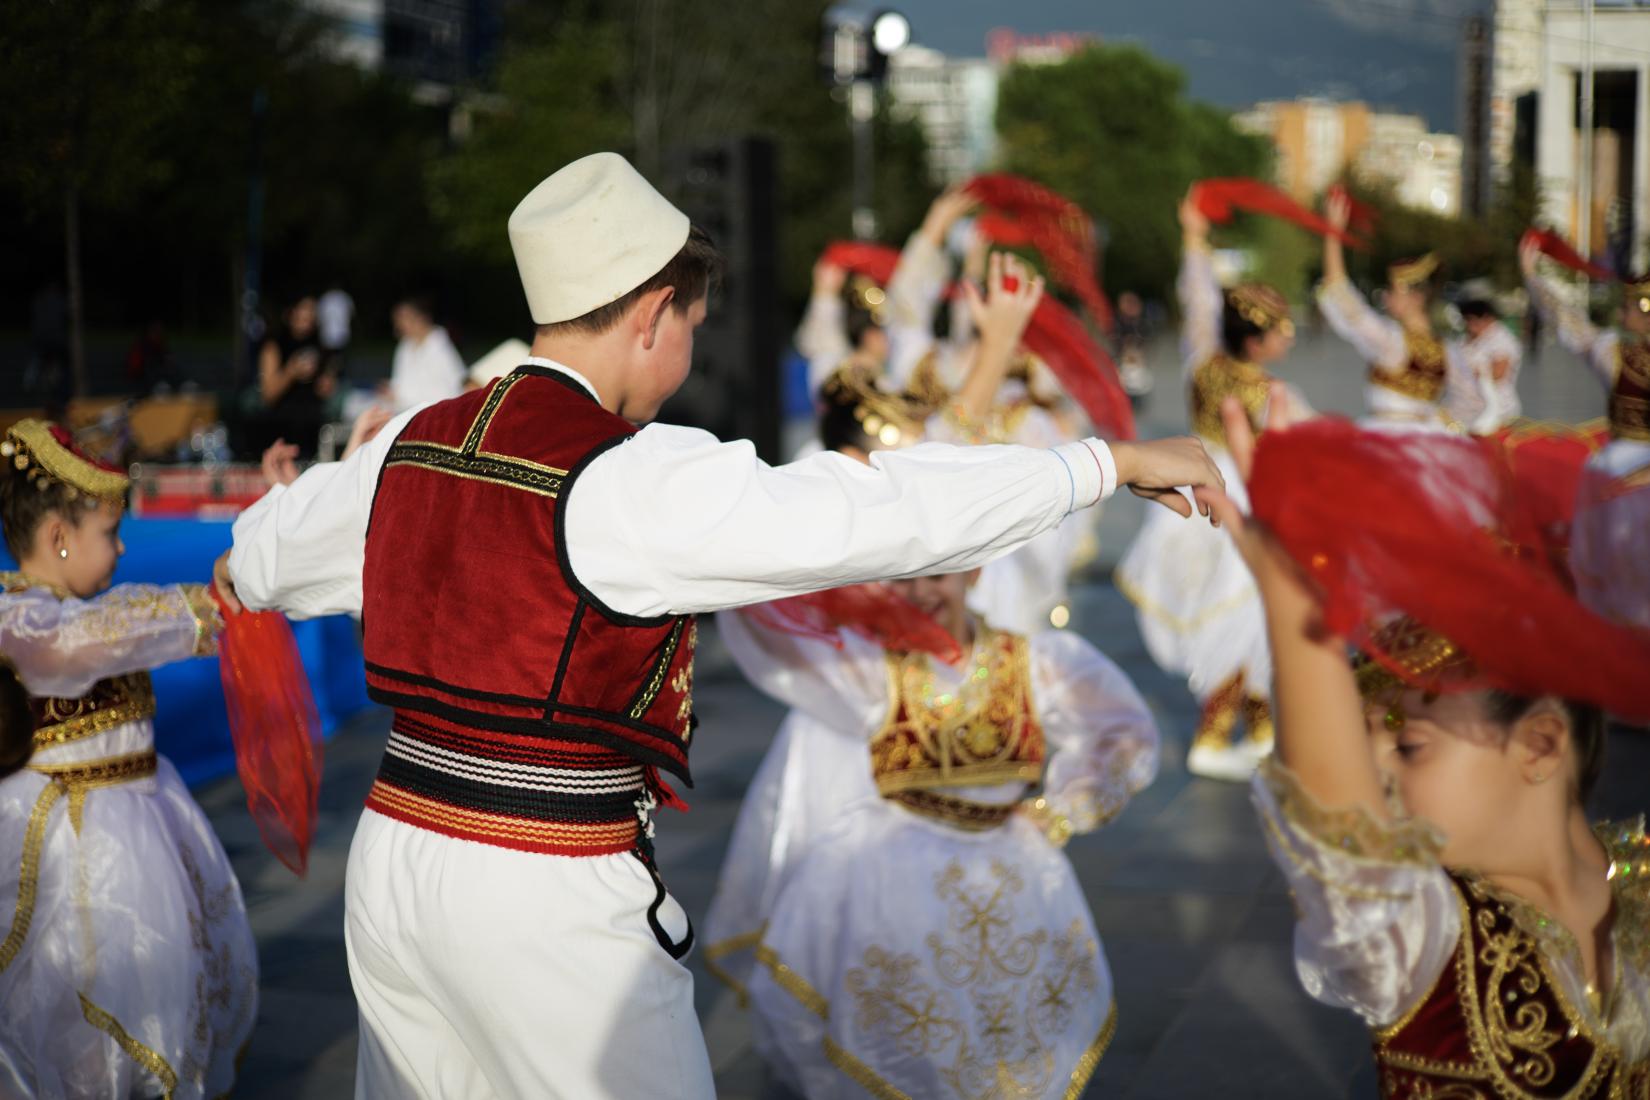 Child dressed in national costume of Albania dancing 